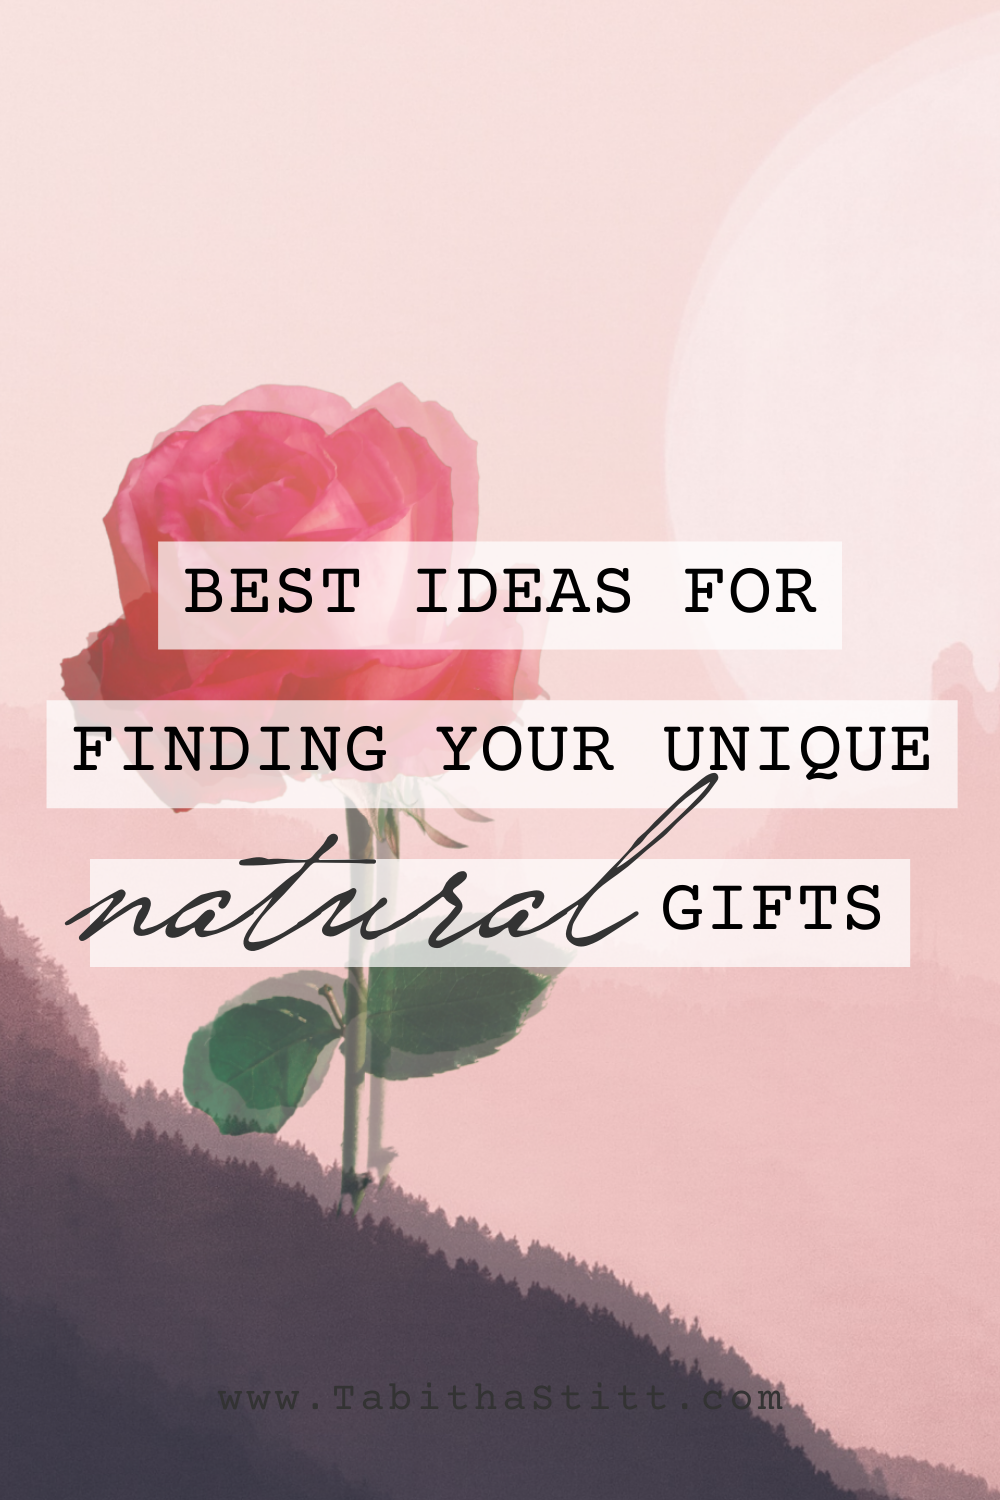 Best Ideas for Finding Your Natural Unique Gifts on The Self-Help Psychic Podcast with Tabitha Stitt, The Self-Help Psychic with a pink rose for acceptance of your natural gifts